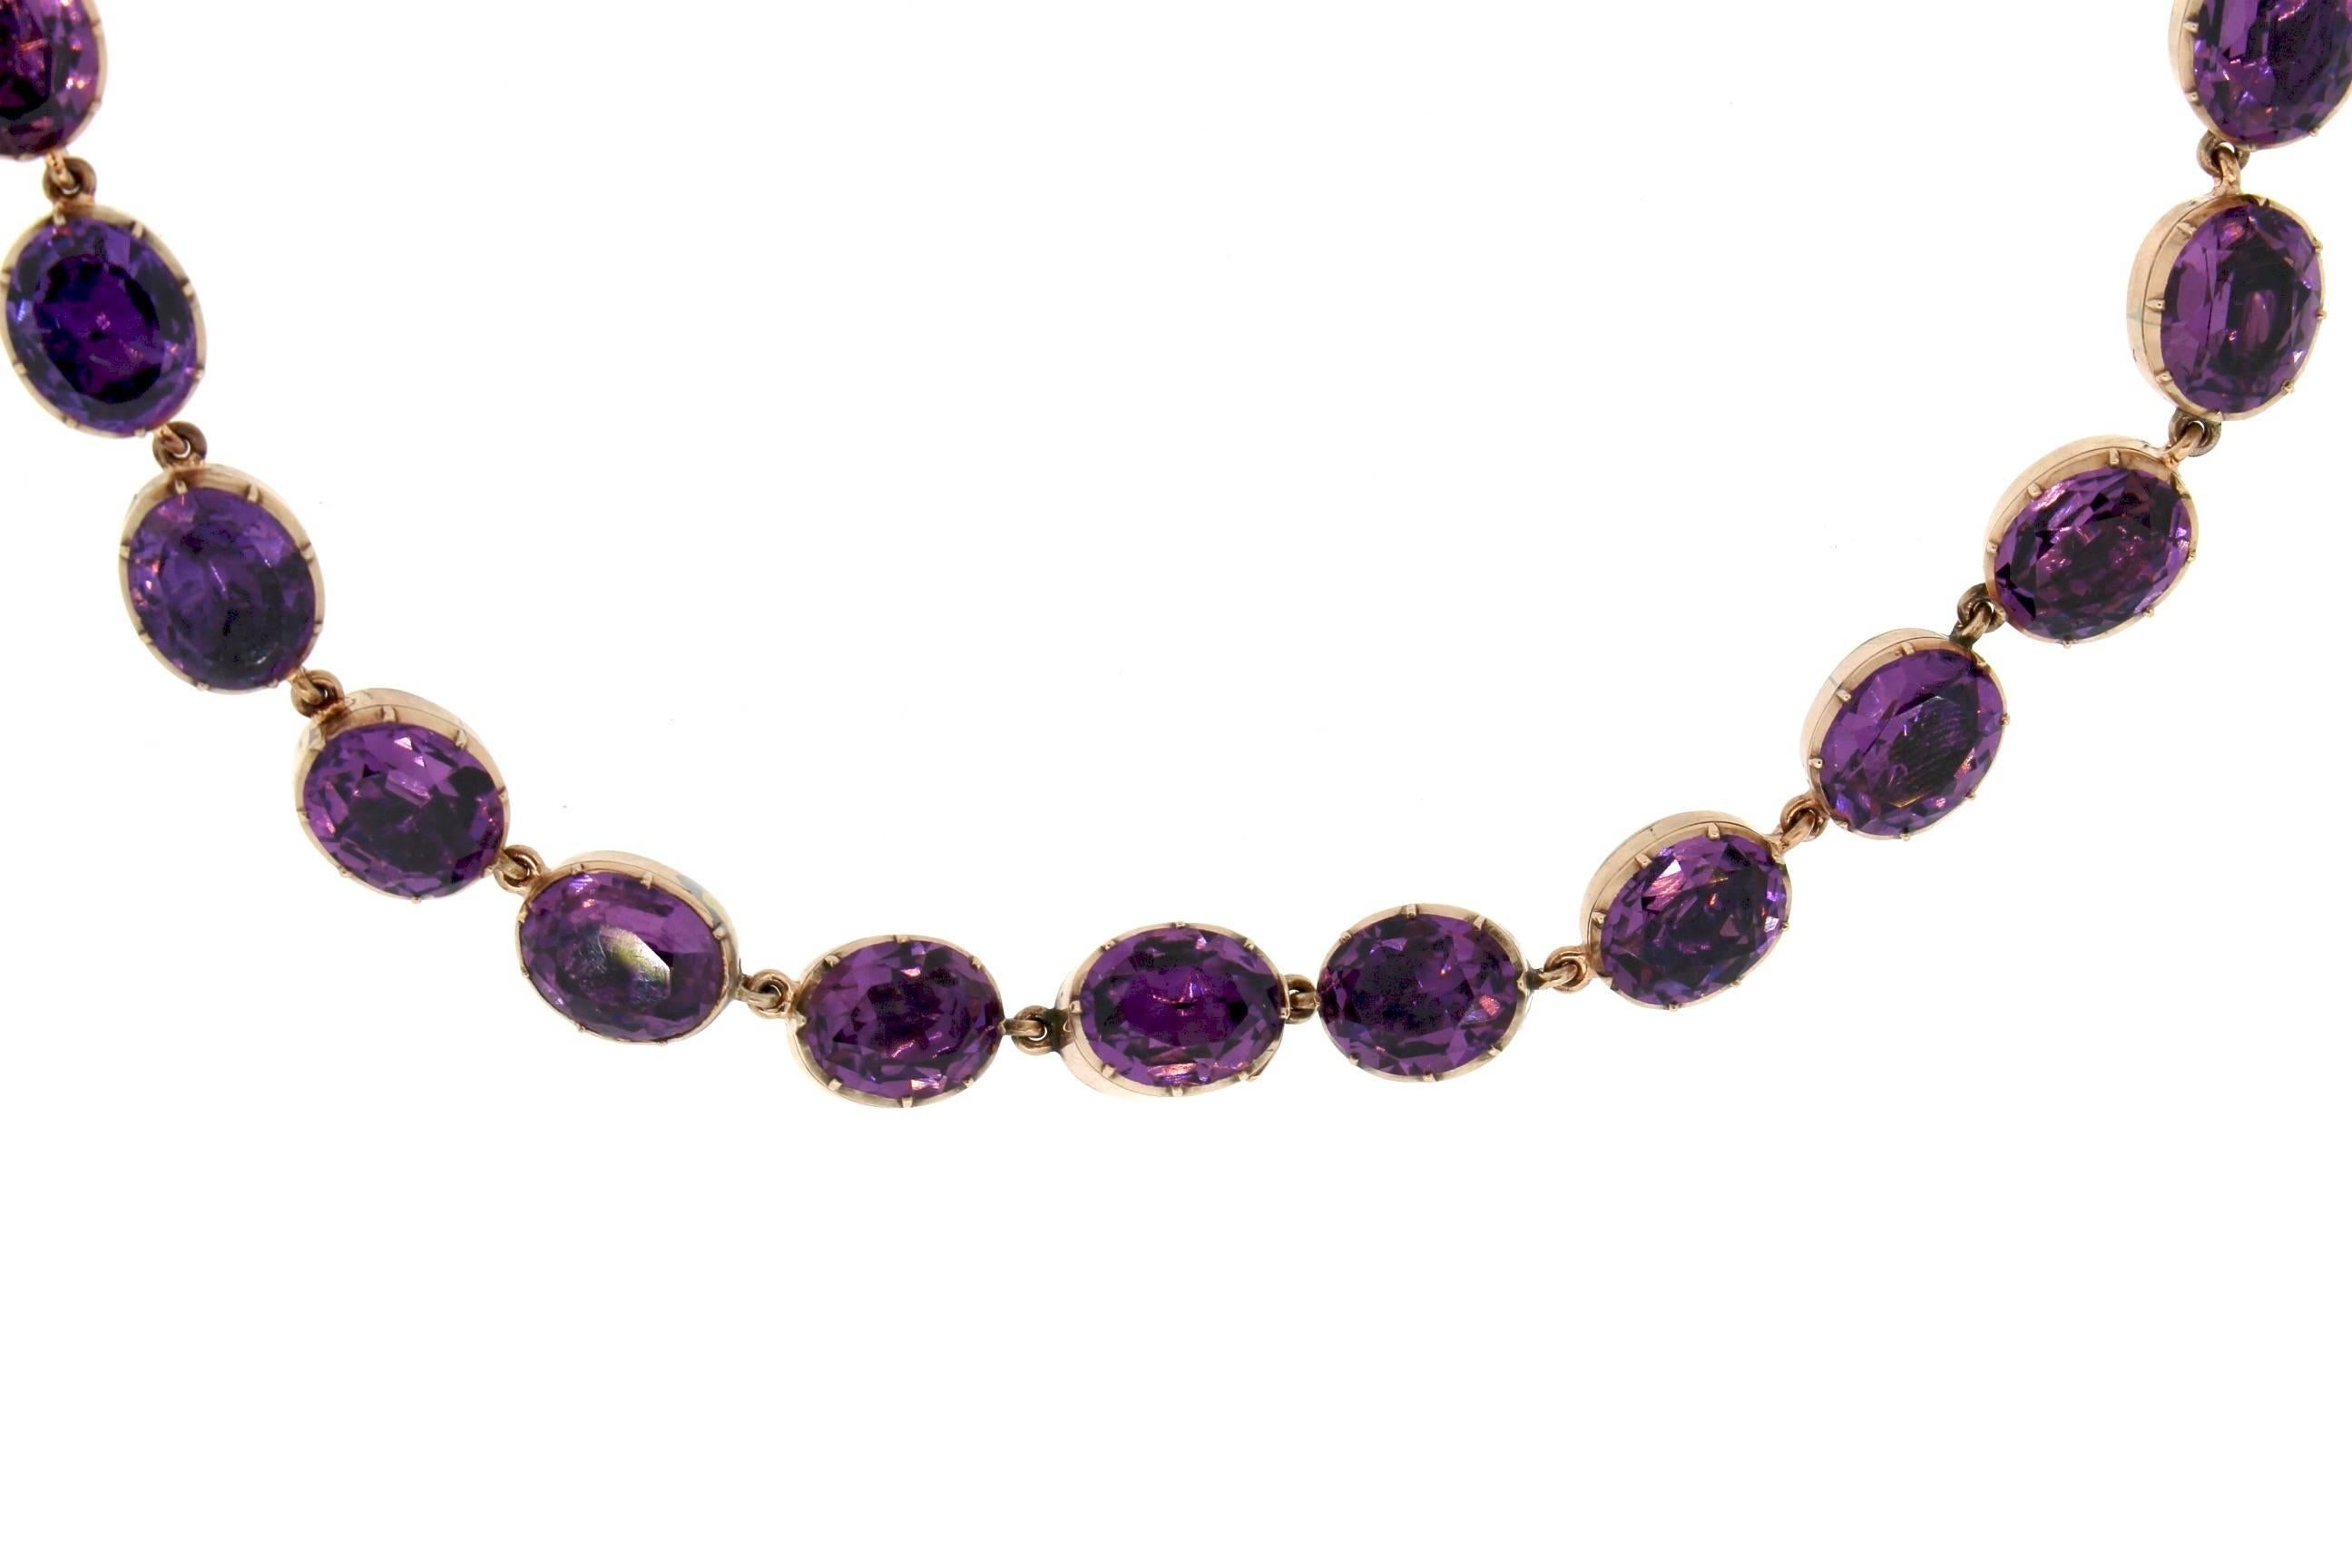 George V Antique Georgian Amethyst Gold Riviere Necklace